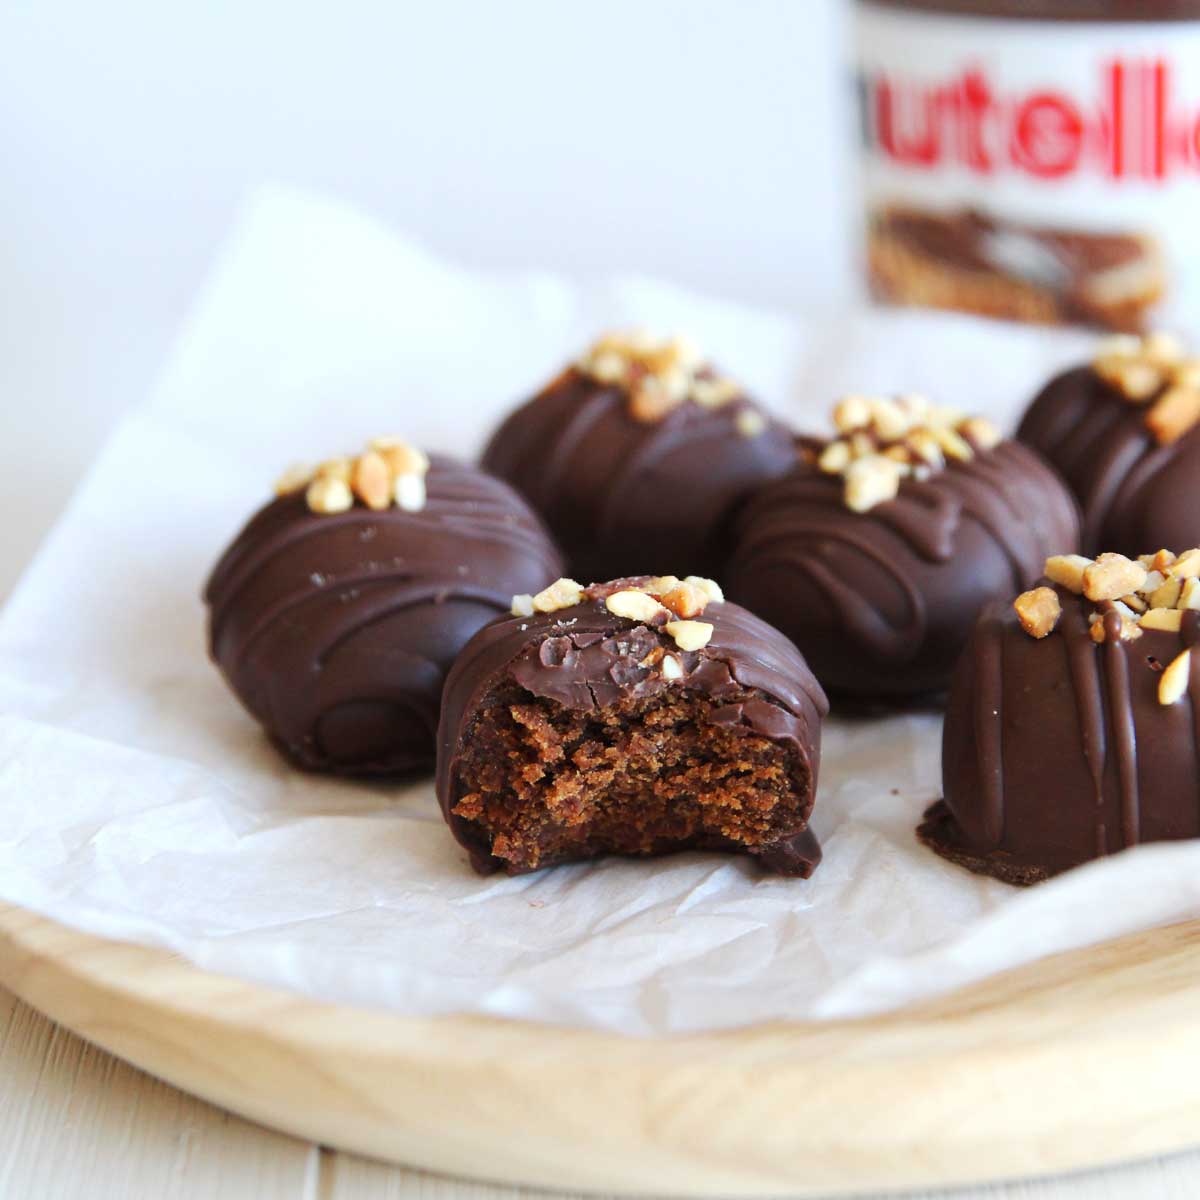 Healthier Nutella Chocolate Easter Eggs Made with PB Powder - Double Chocolate Scones